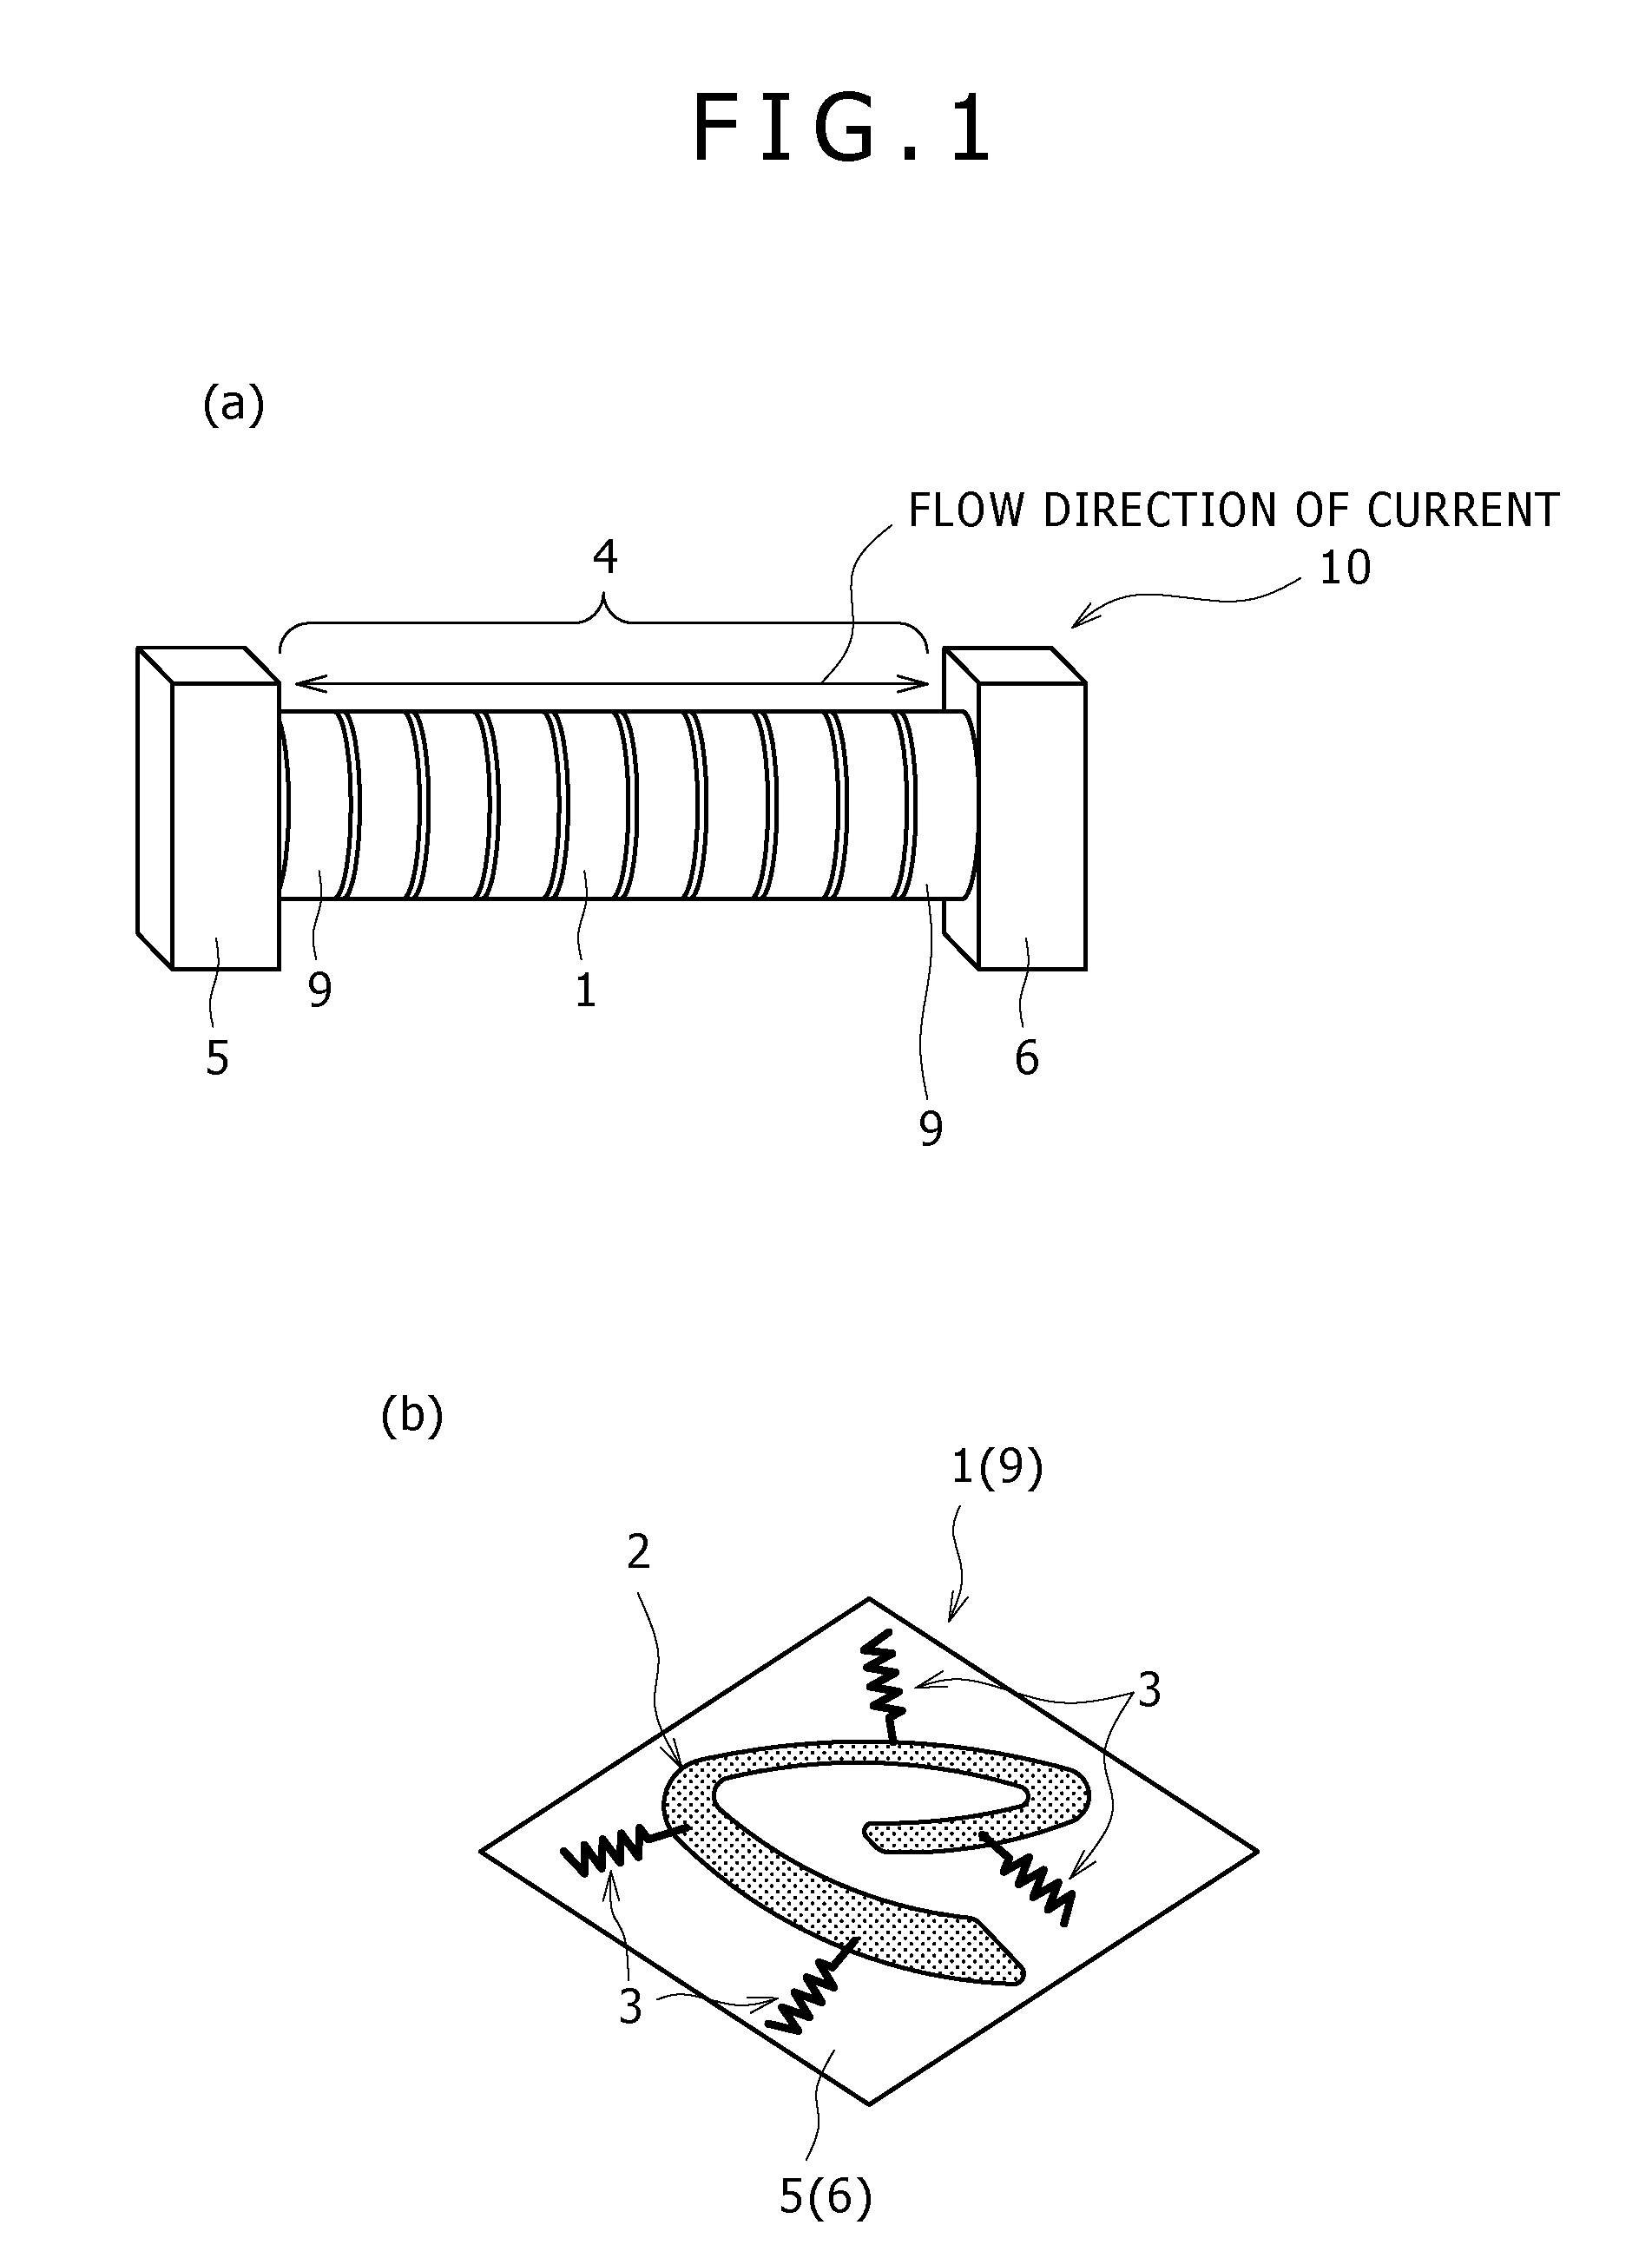 Functional molecular element, process for producing the same and functional molecular device